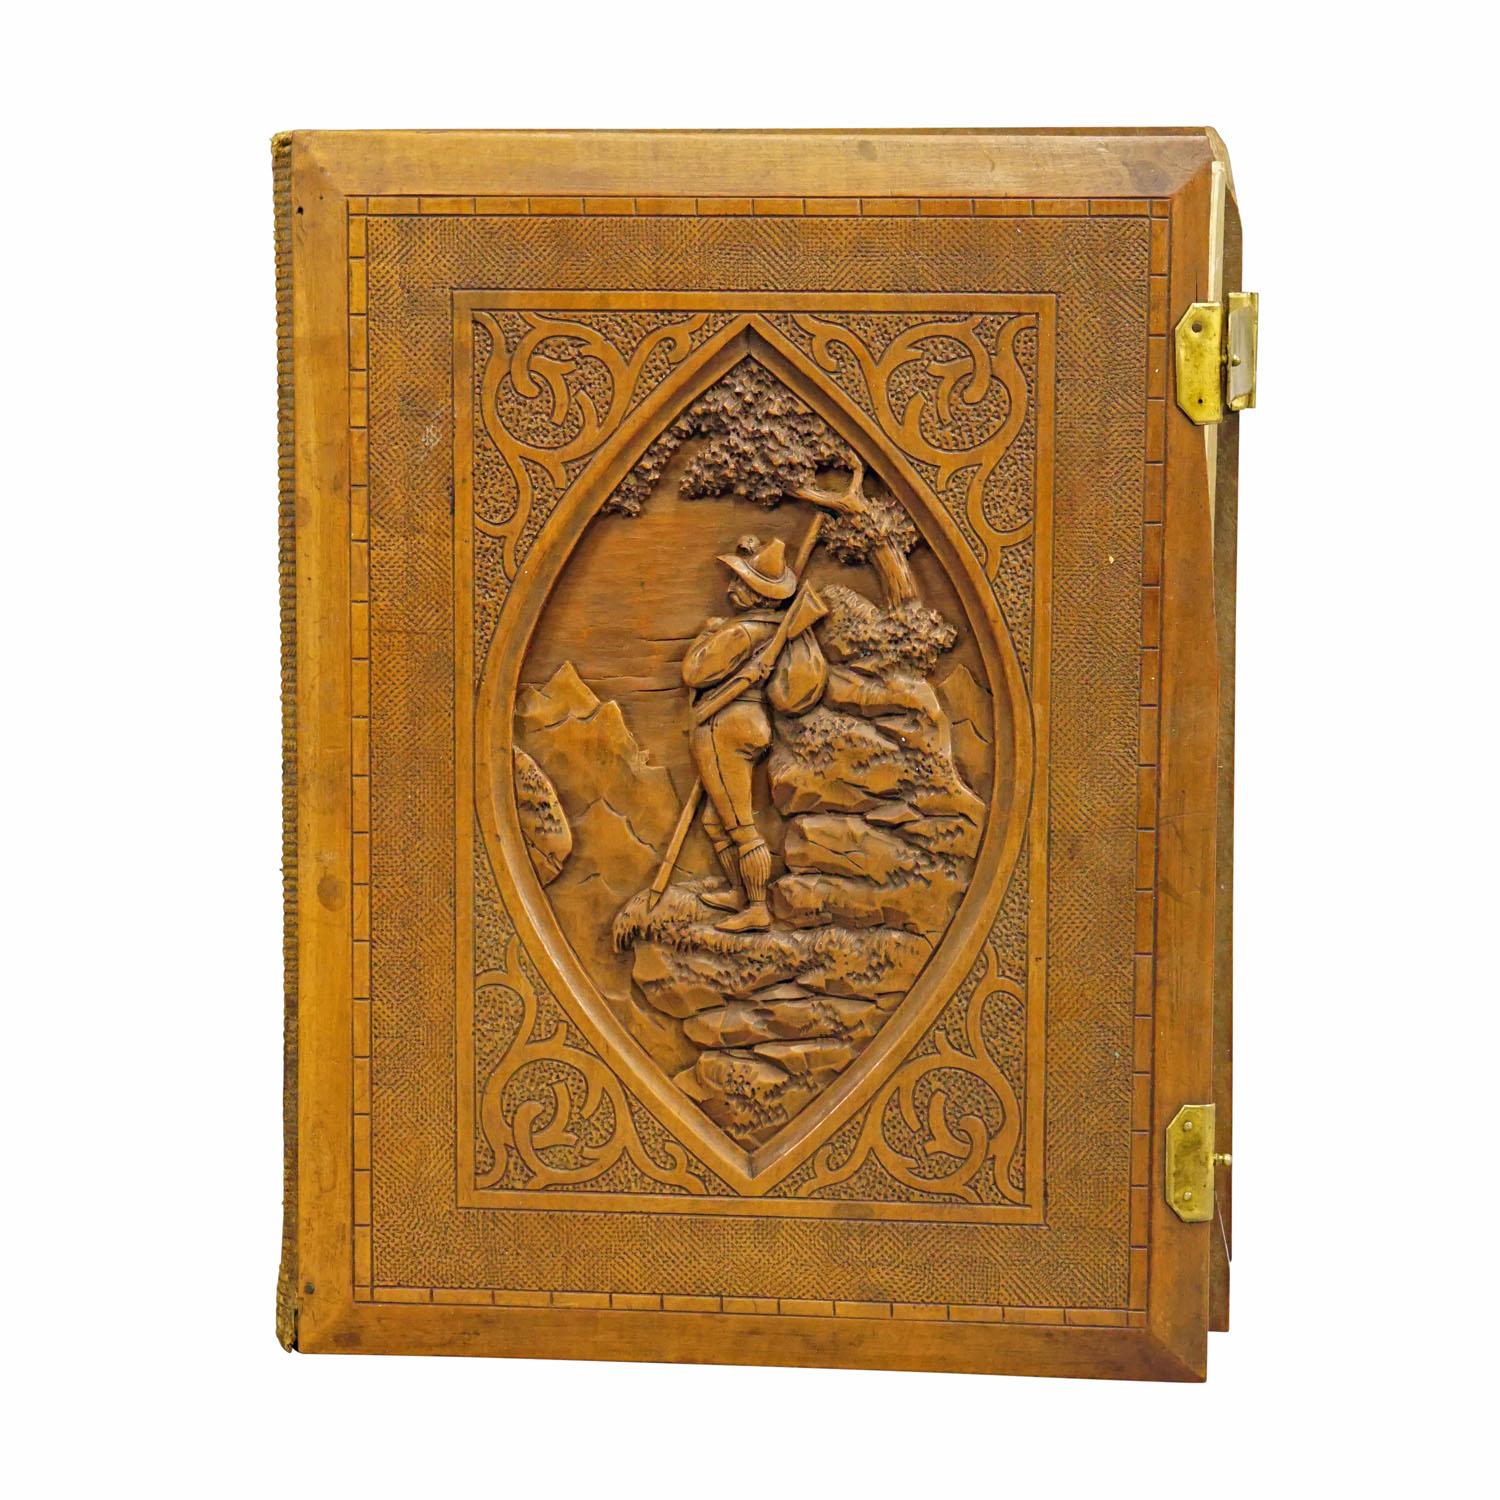 Large Antique Photo Album with Wooden Carved Cover, Brienz ca. 1900

A lovely antique photo album featuring a lindenwood carved cover depicting a hunter in alpine enviroment. Handcarved in Brienz, Switzerland around 1900. Inside with several antique